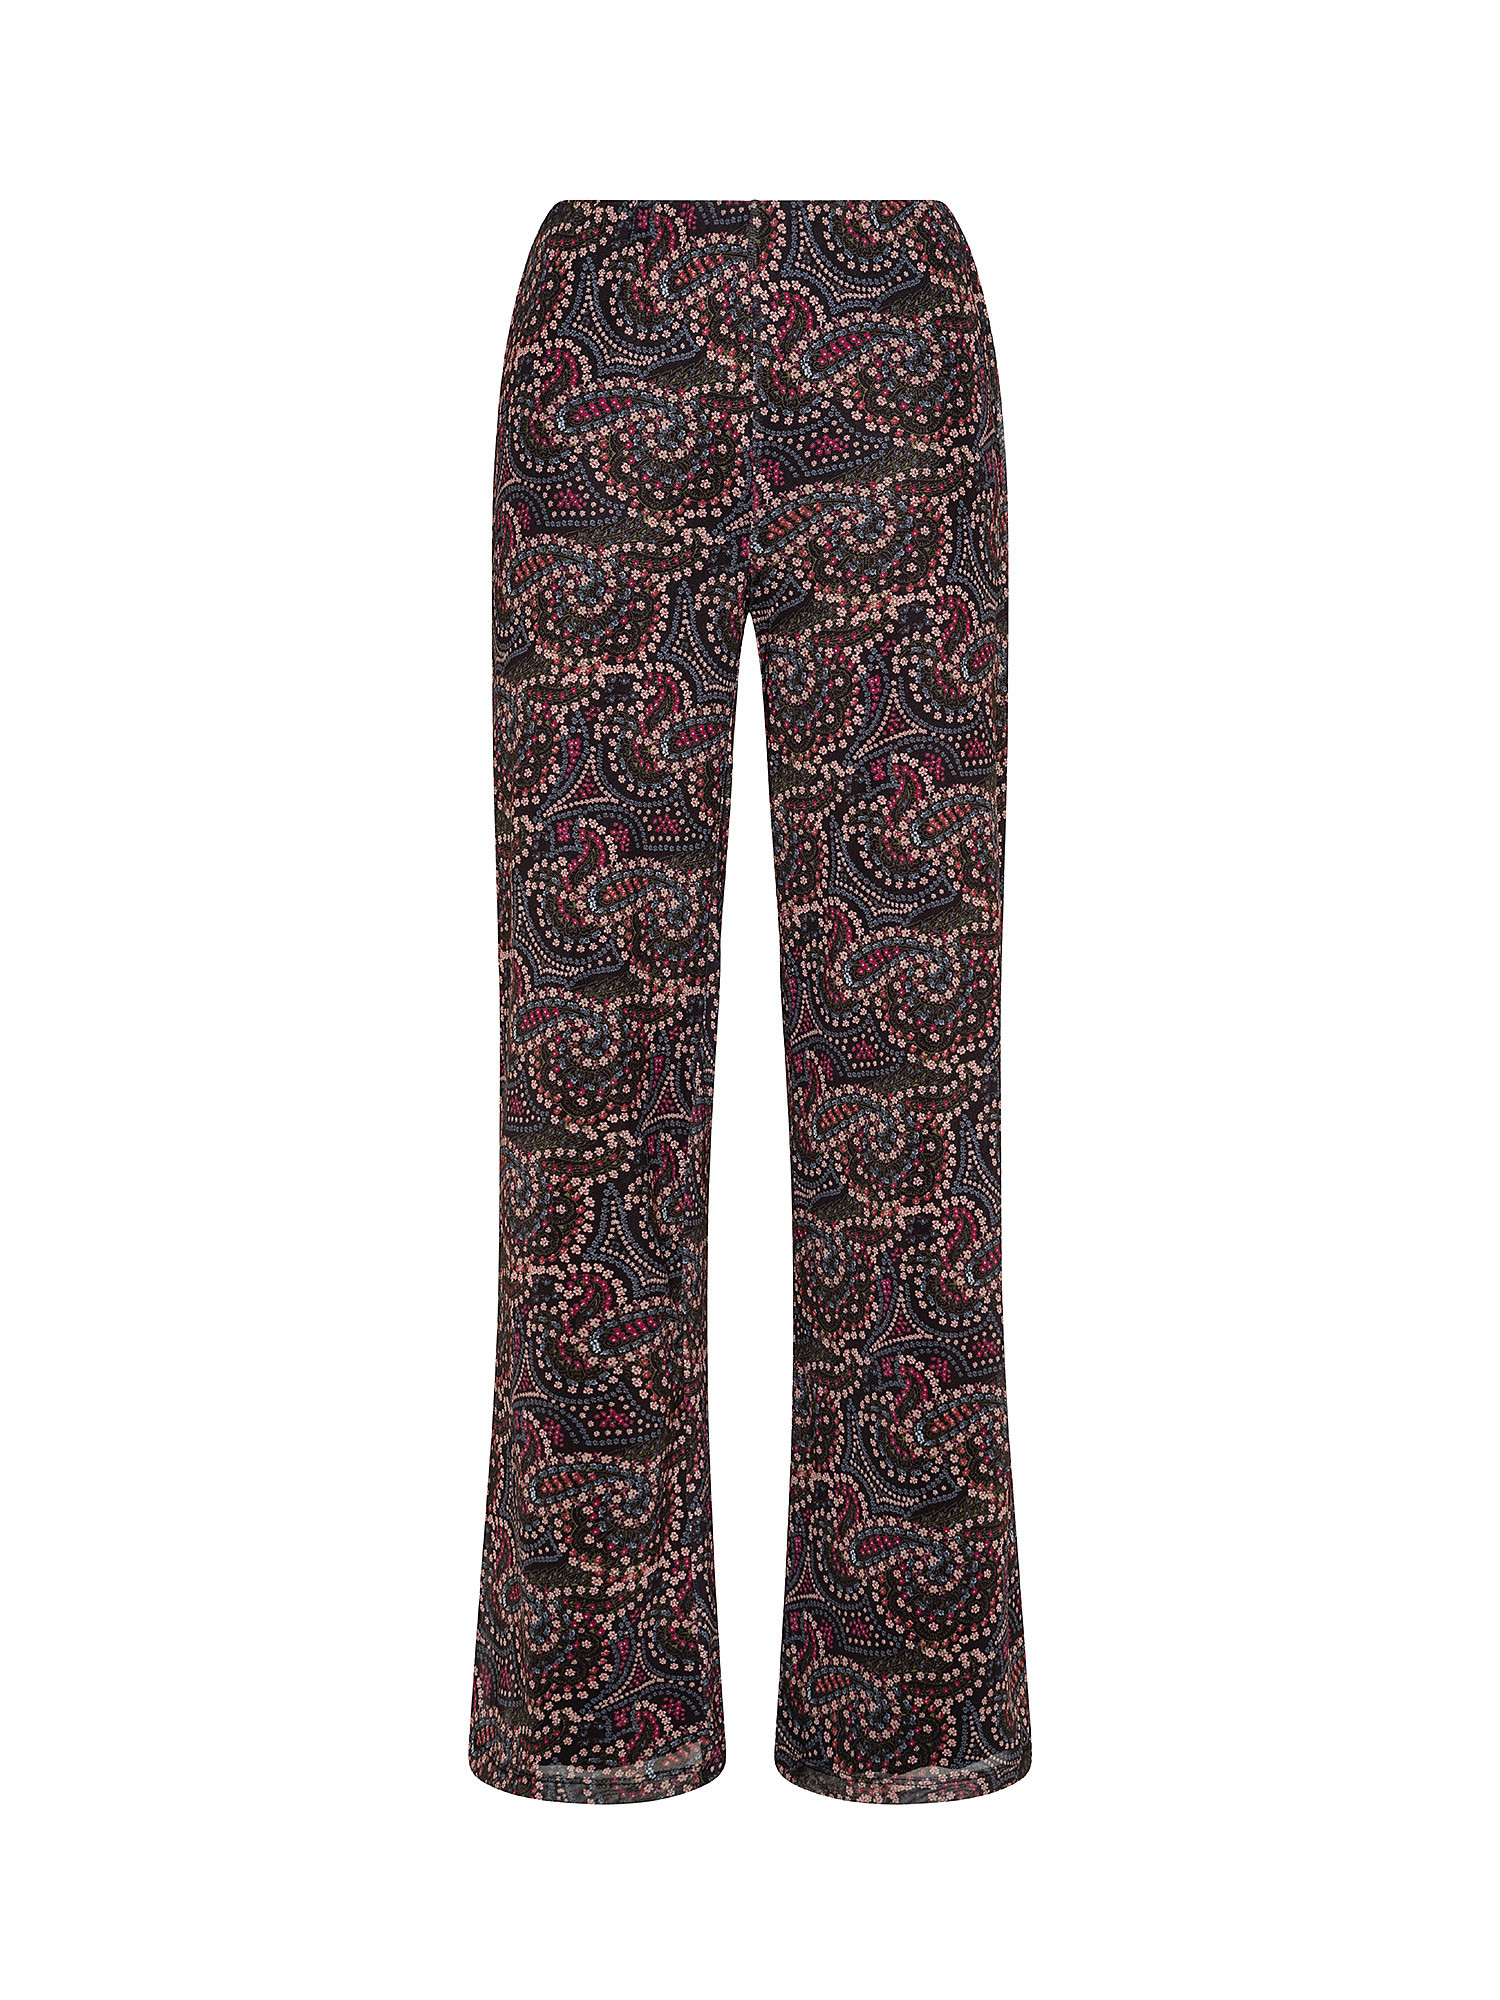 Mesh trousers, Brown, large image number 0